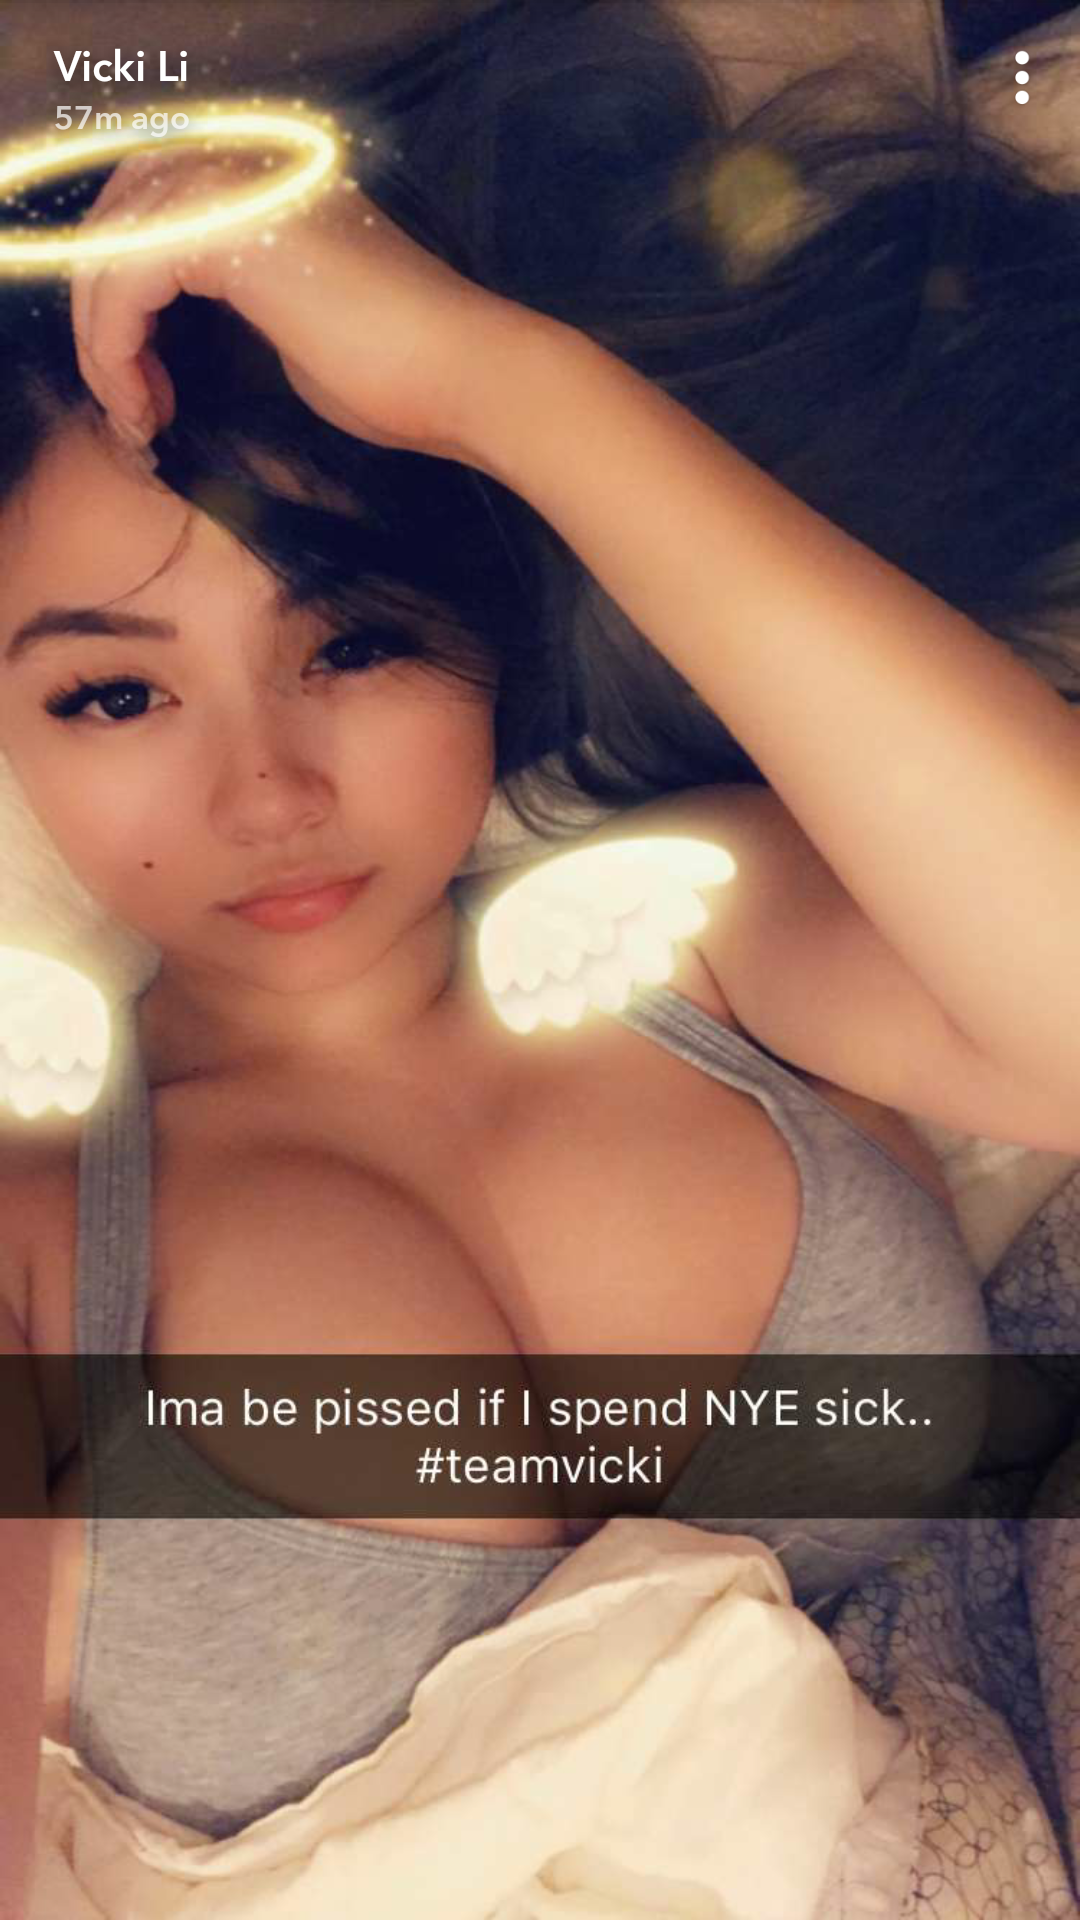 Sick on new years eve